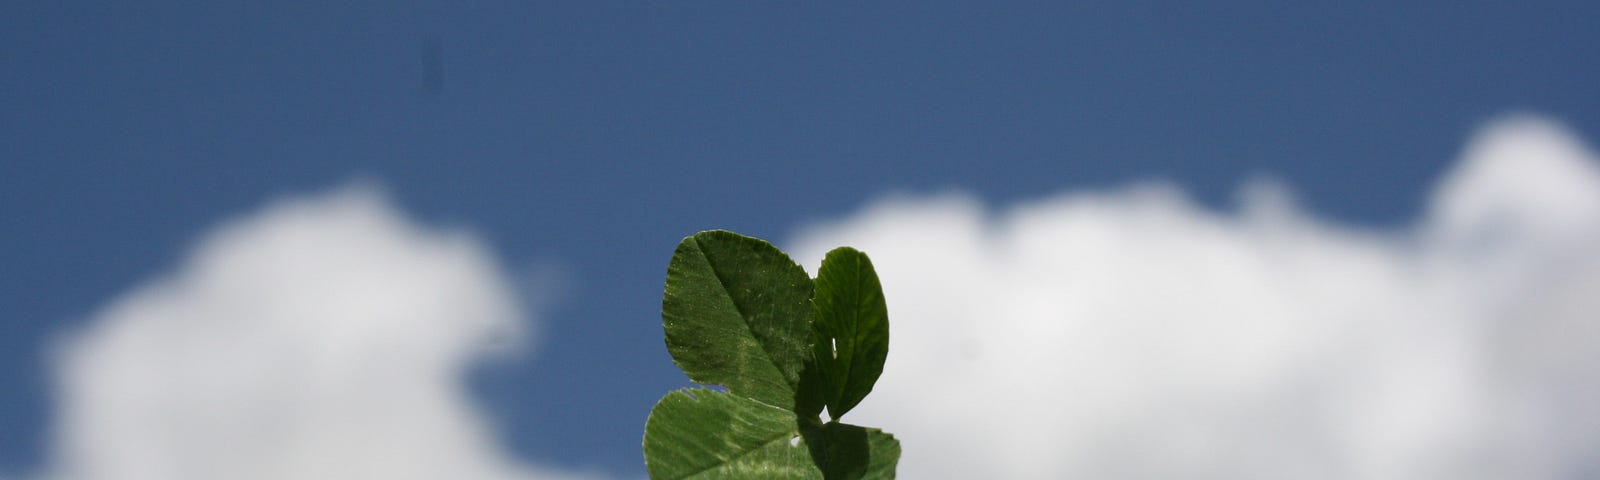 Blue sky with clouds in the background. a close up shot of a thumb and finger holding up a four leaf clover.